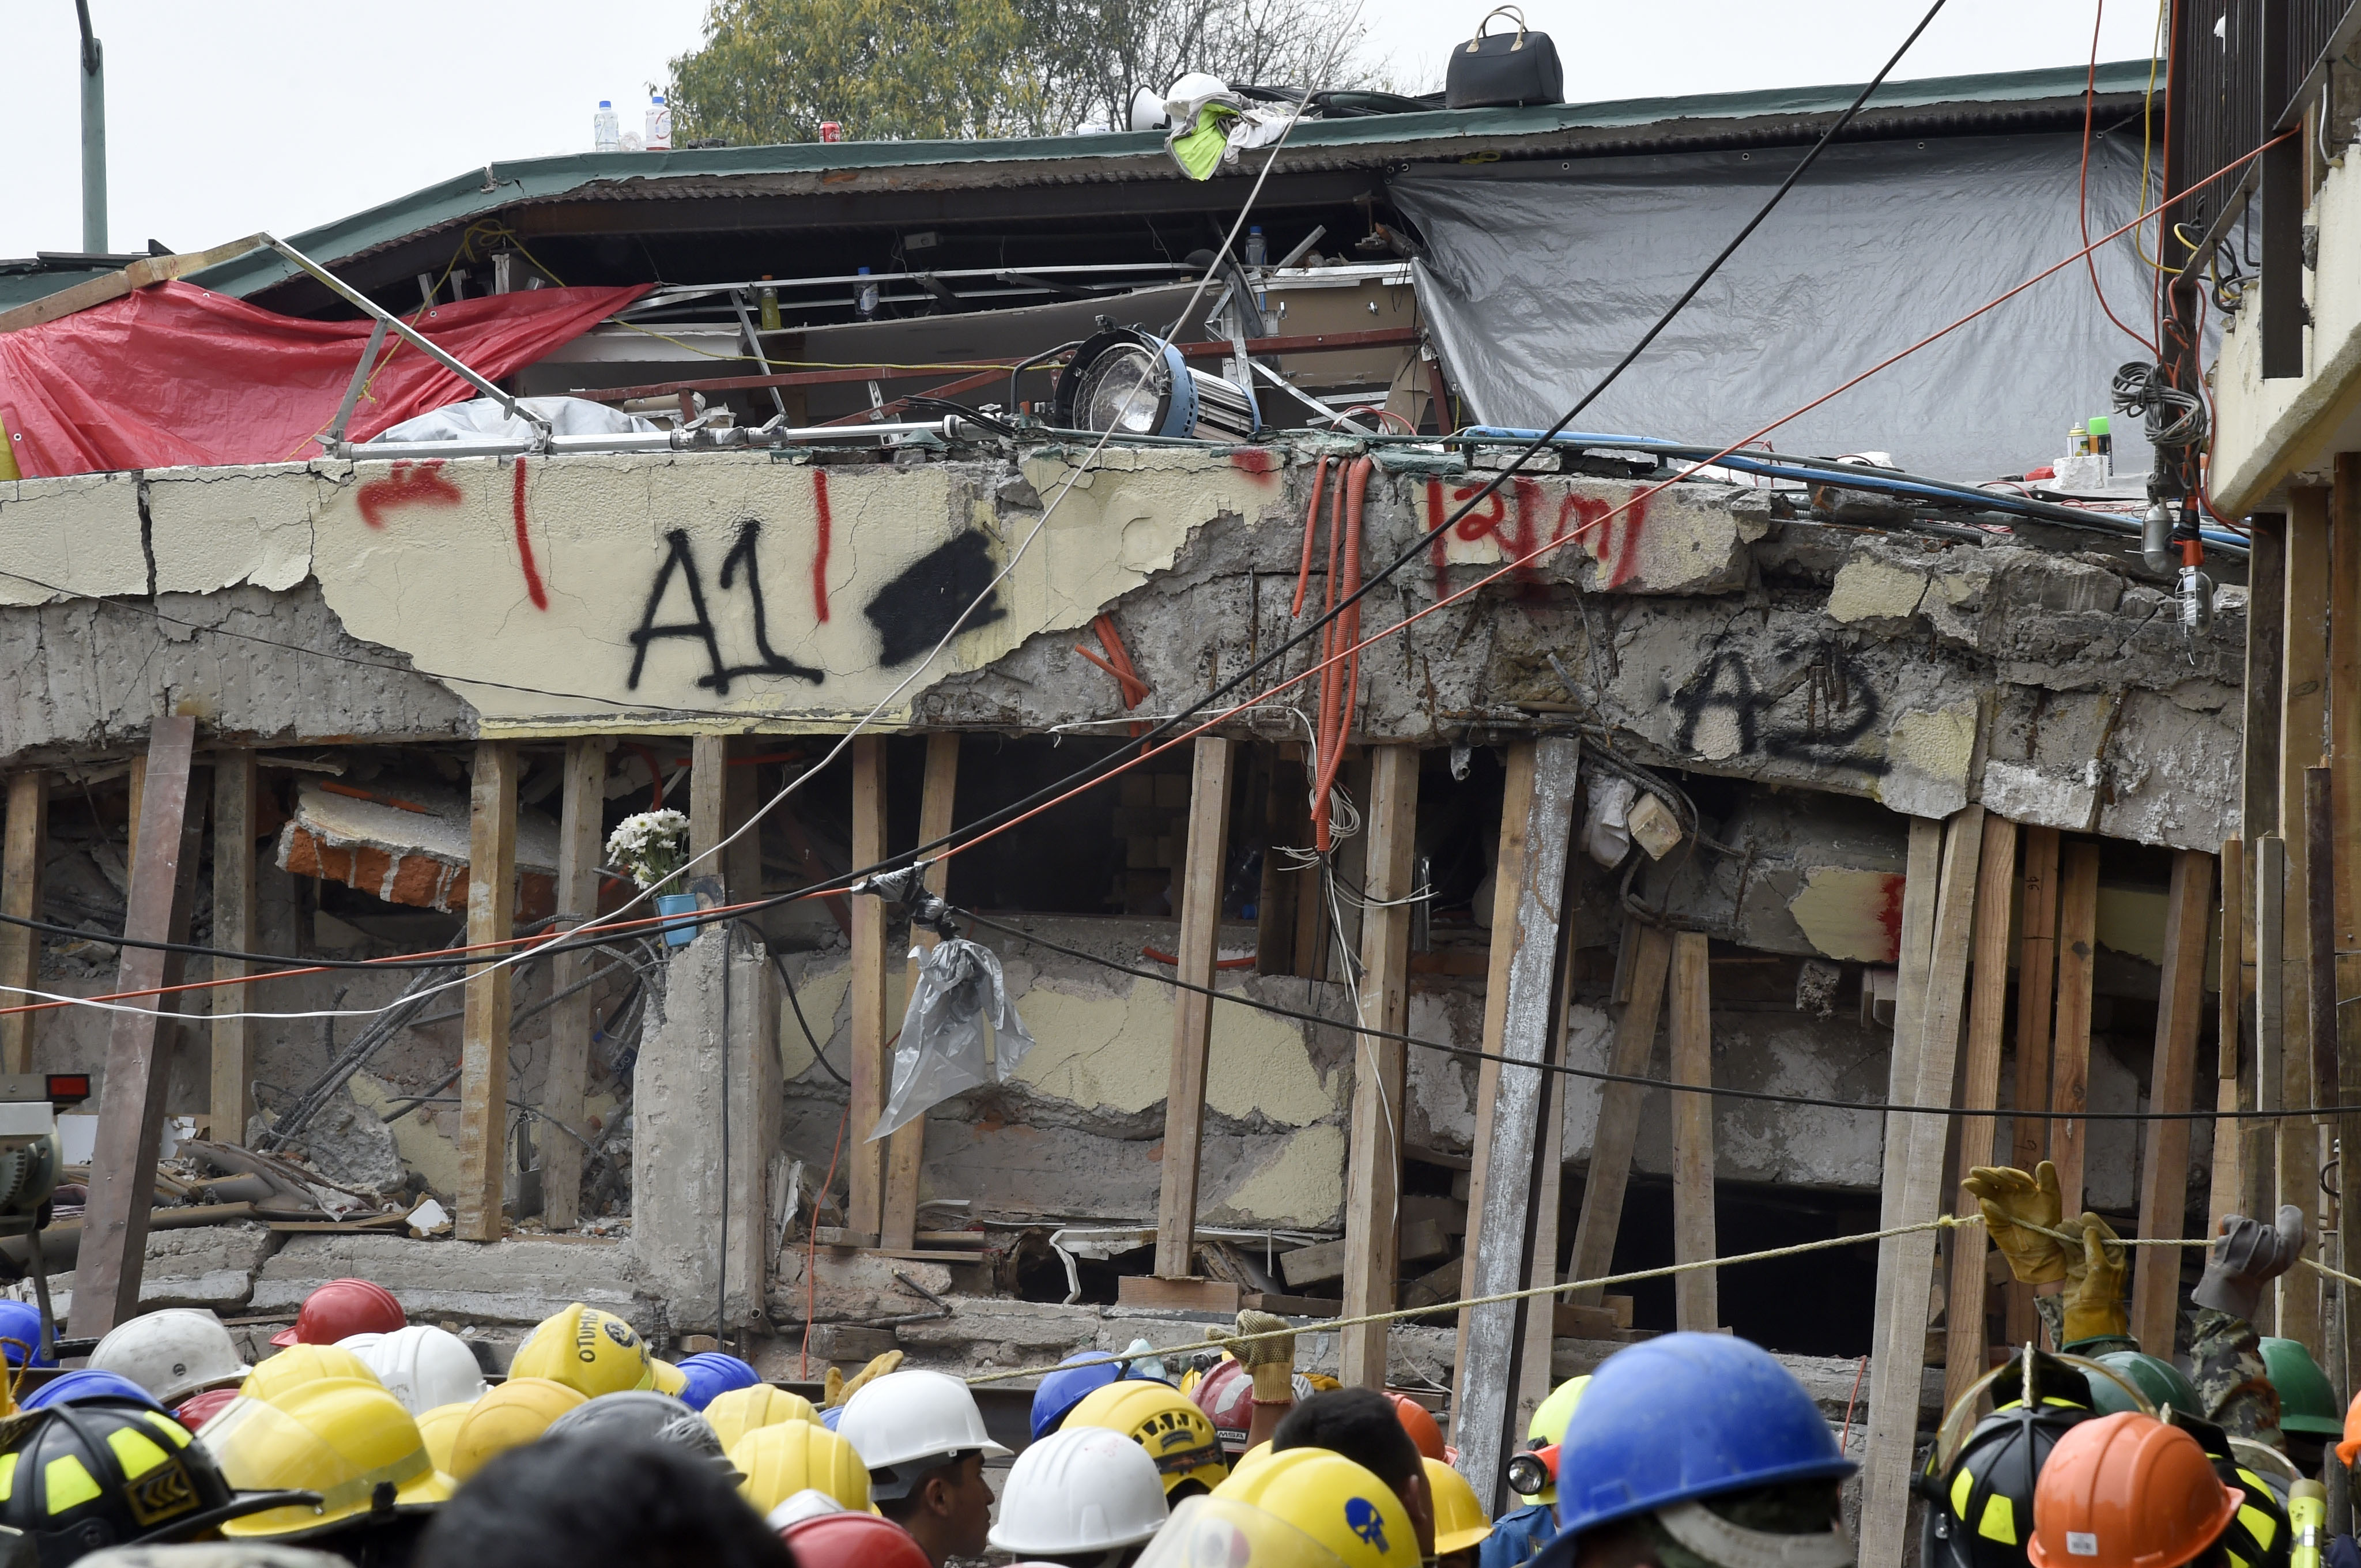 Rescue workers take part in the search for survivors and bodies at the Enrique Rebsamen elementary school in Mexico City on September 21, 2017, two days after a strong quake hit central Mexico. A powerful 7.1 earthquake shook Mexico City on Tuesday, causing panic among the megalopolis' 20 million inhabitants on the 32nd anniversary of a devastating 1985 quake. / AFP PHOTO / Alfredo ESTRELLA (Photo credit should read ALFREDO ESTRELLA/AFP/Getty Images)